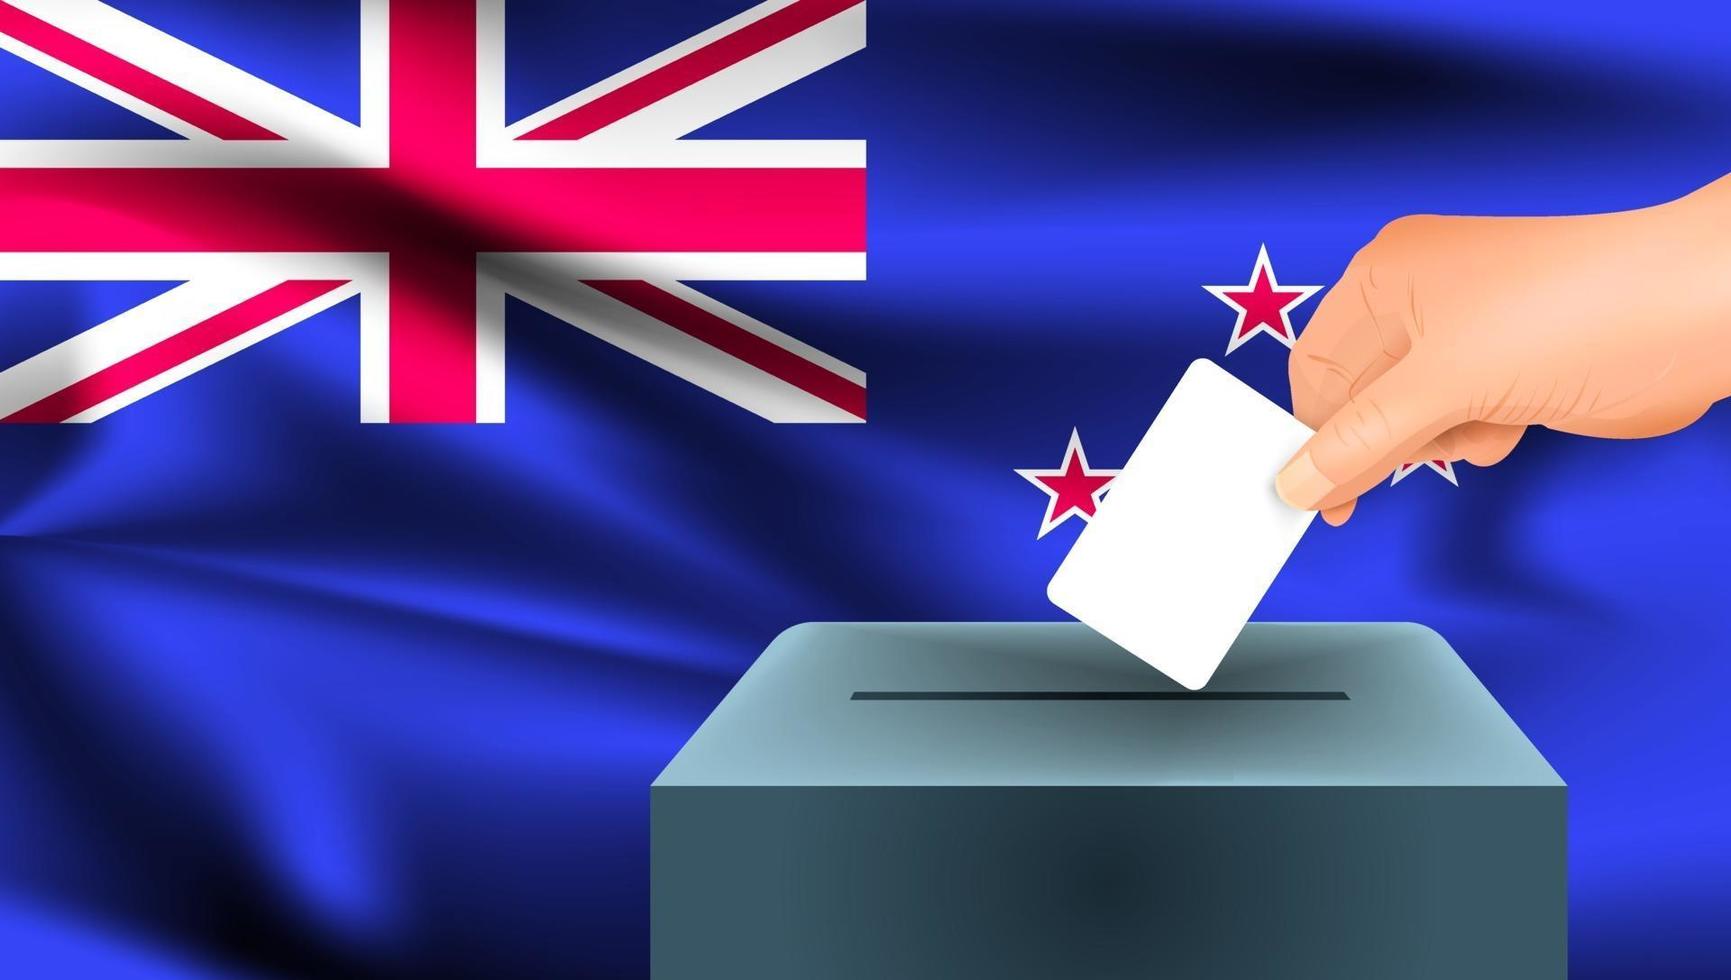 New Zealand flag, male hand voting with New Zealand flag background vector